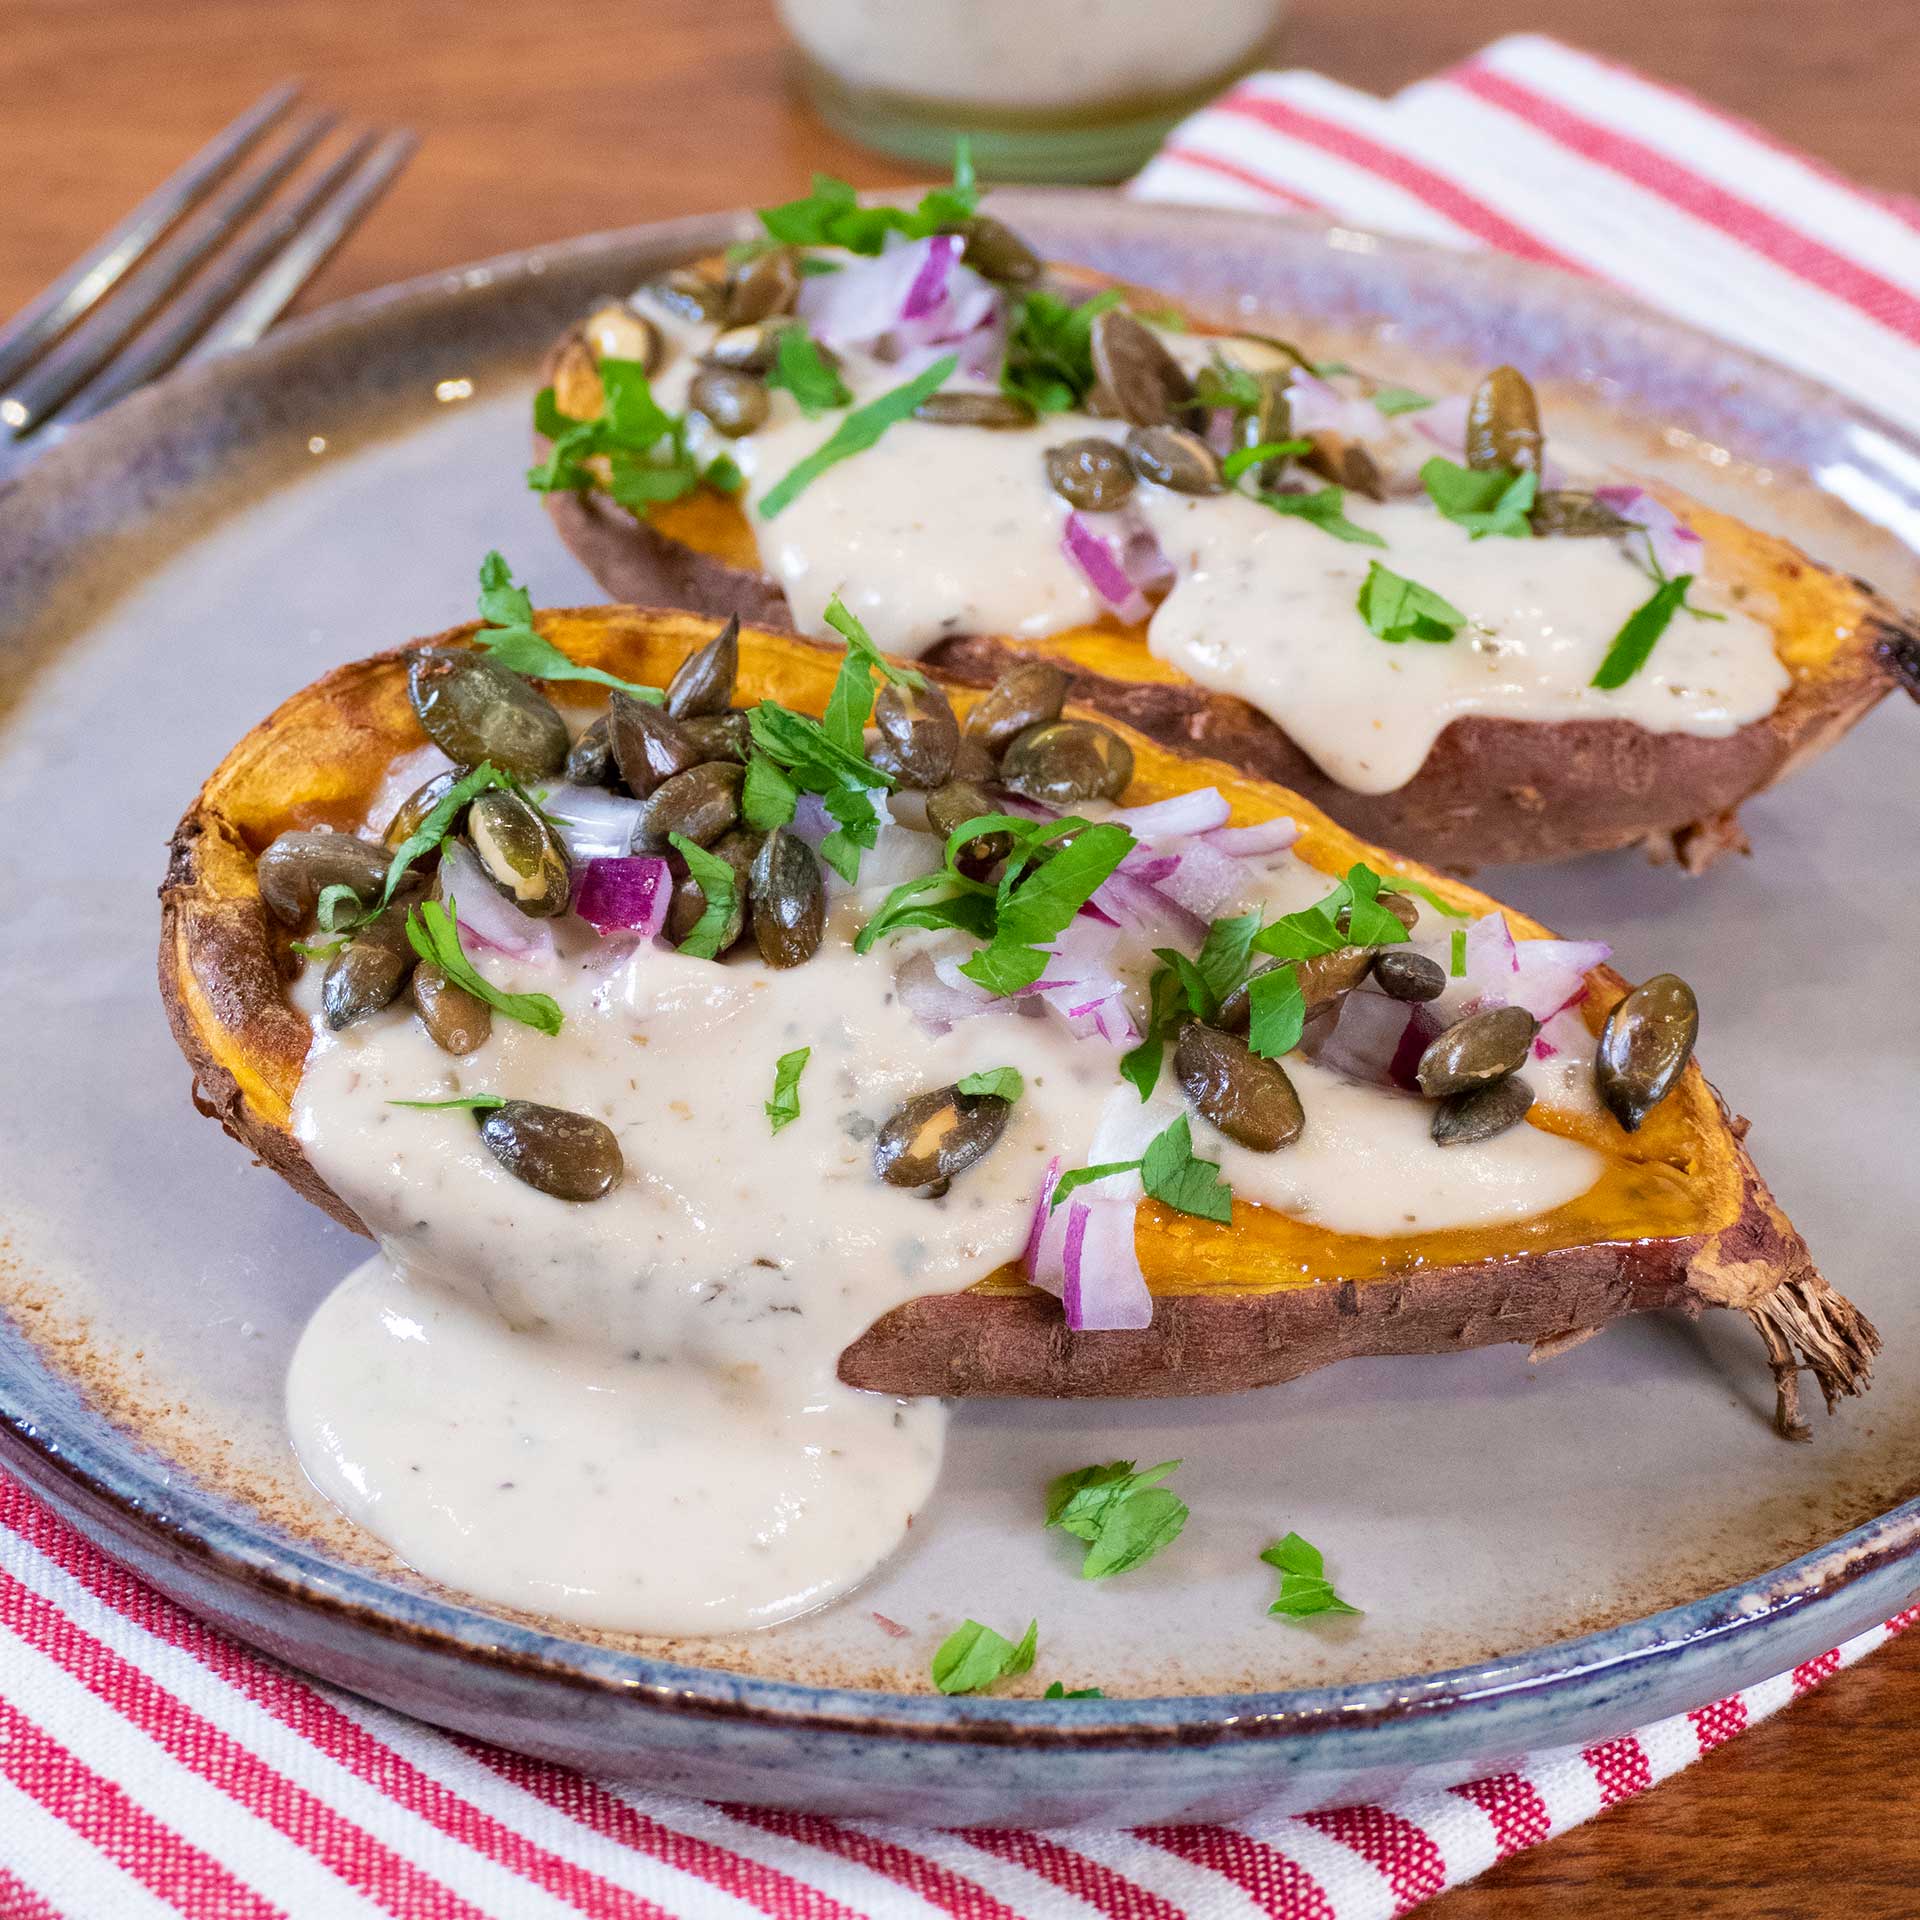 Baked sweet potato with tahini dressing and toasted pumpkin seeds